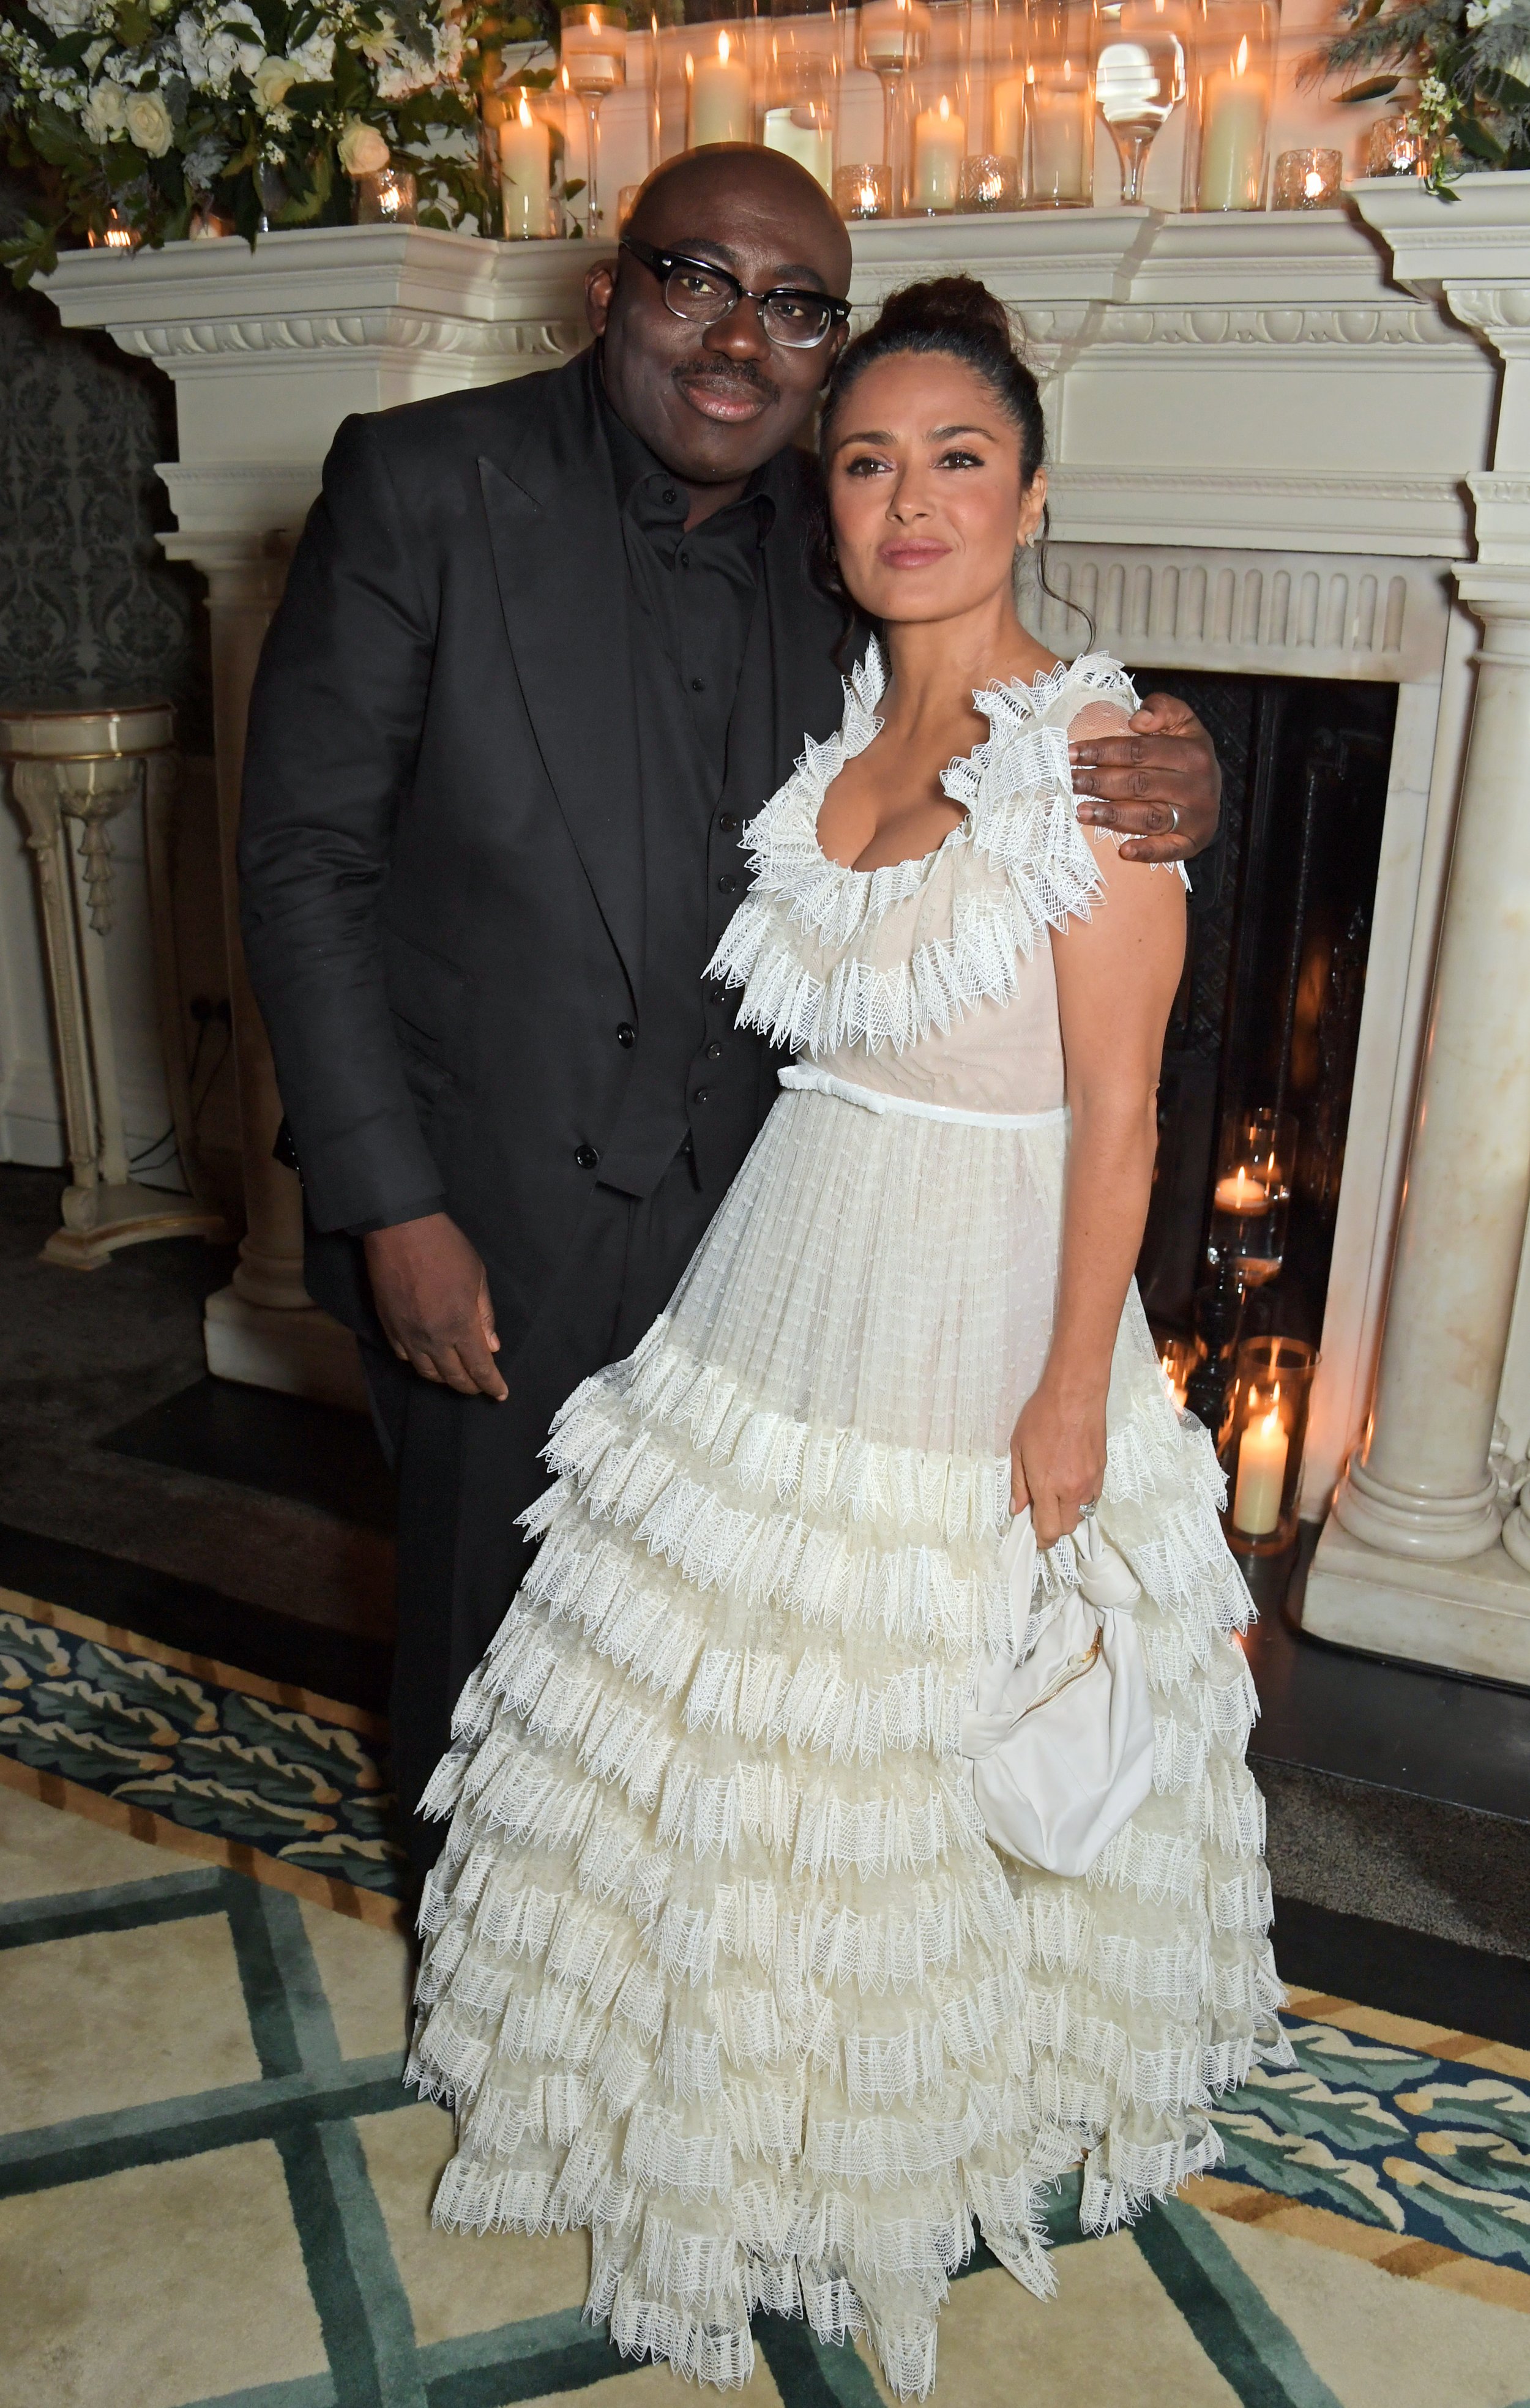  LONDON, ENGLAND - SEPTEMBER 04: Editor-In-Chief of British Vogue Edward Enninful and Salma Hayek attend a celebration of Edward Enninful's new memoir "A Visible Man" at Claridge's Hotel on September 4, 2022 in London, England. (Photo by David M. Ben